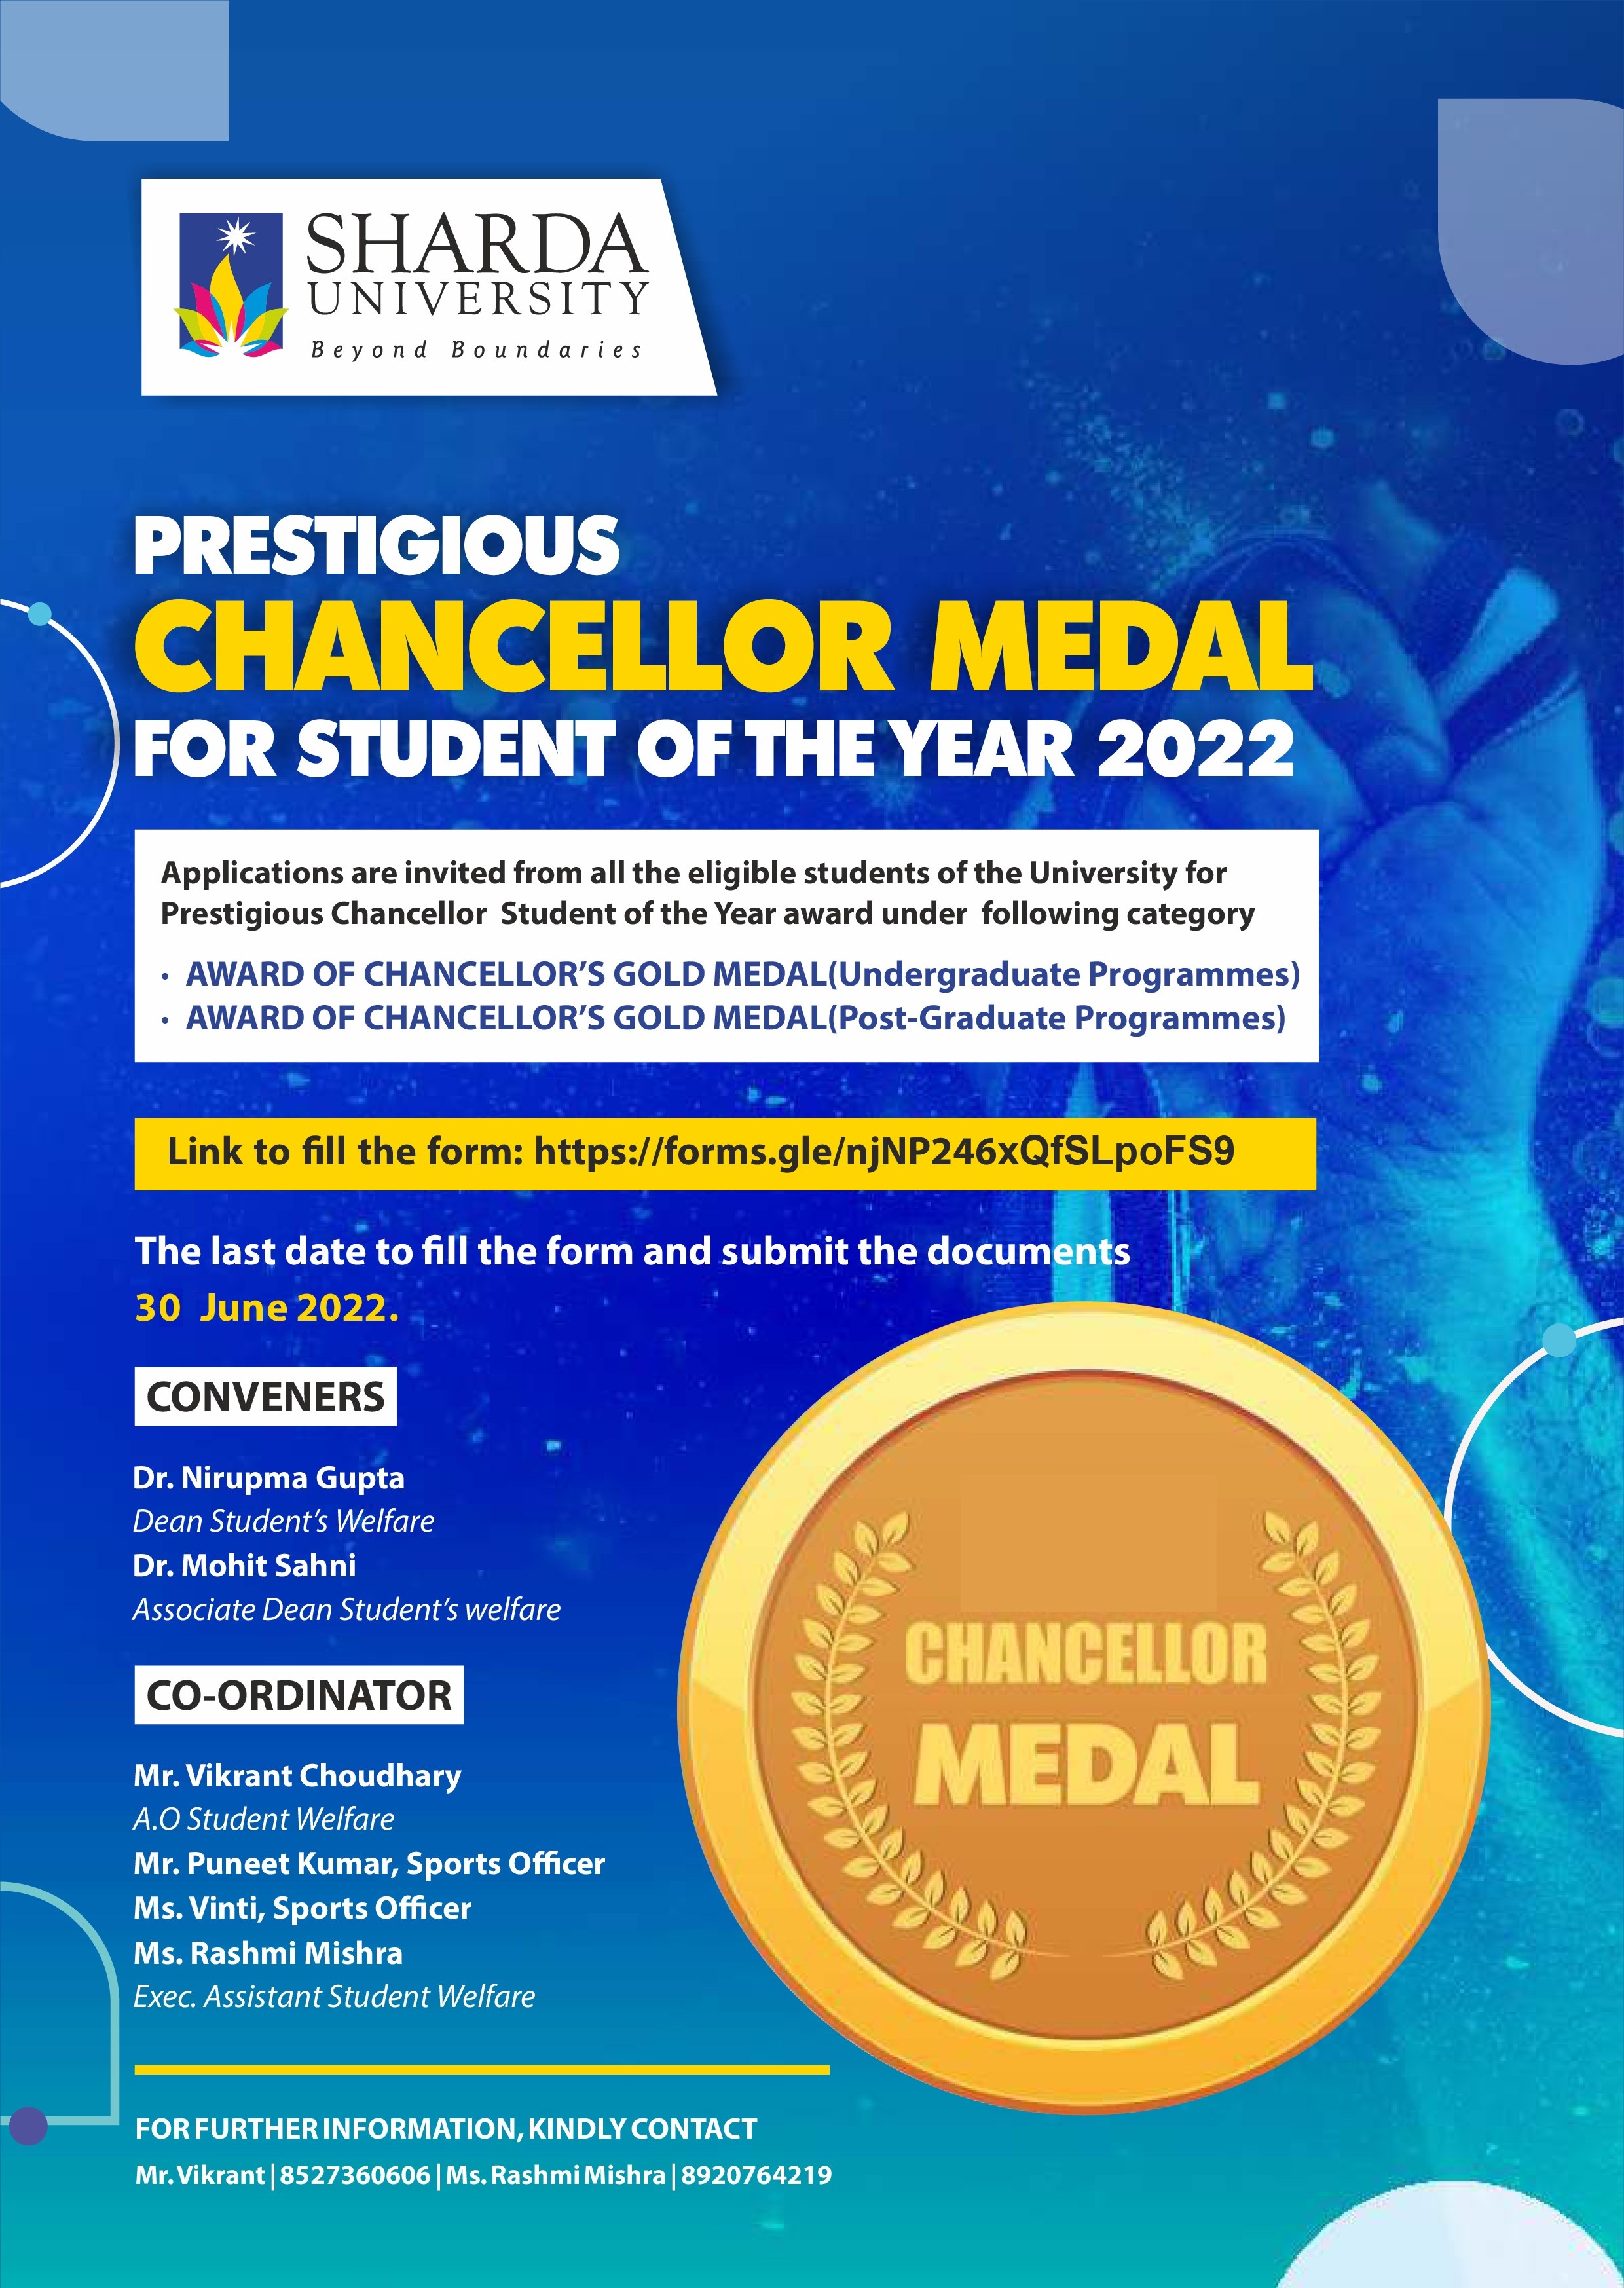 Presigious Chancellor Medal for student of the Year 2022